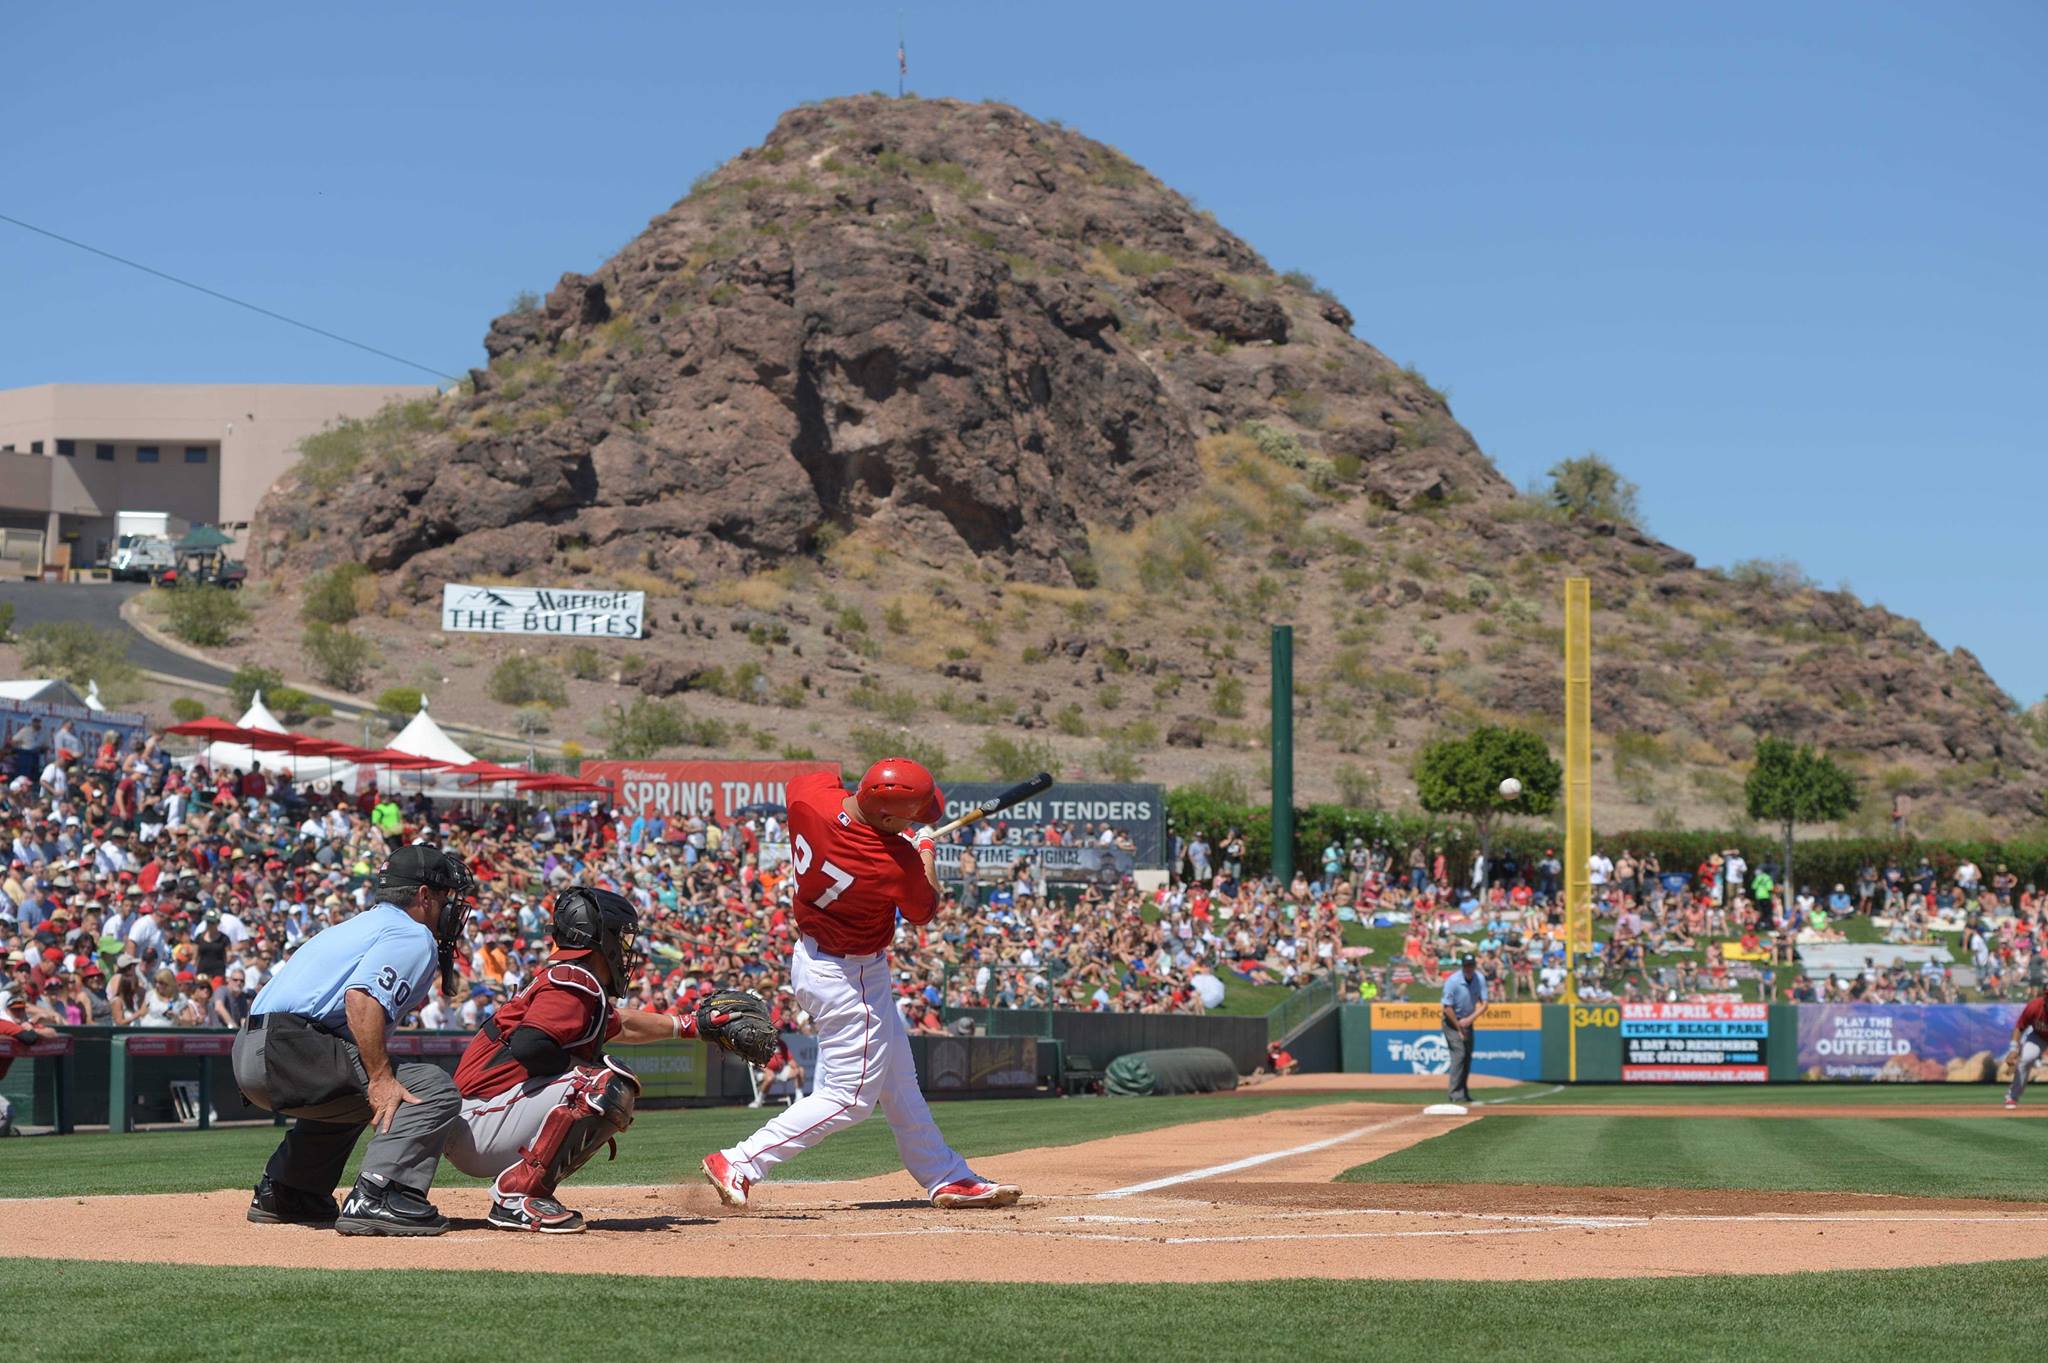 Spring Training in Arizona: Cactus League Schedules, Hotels and Tips